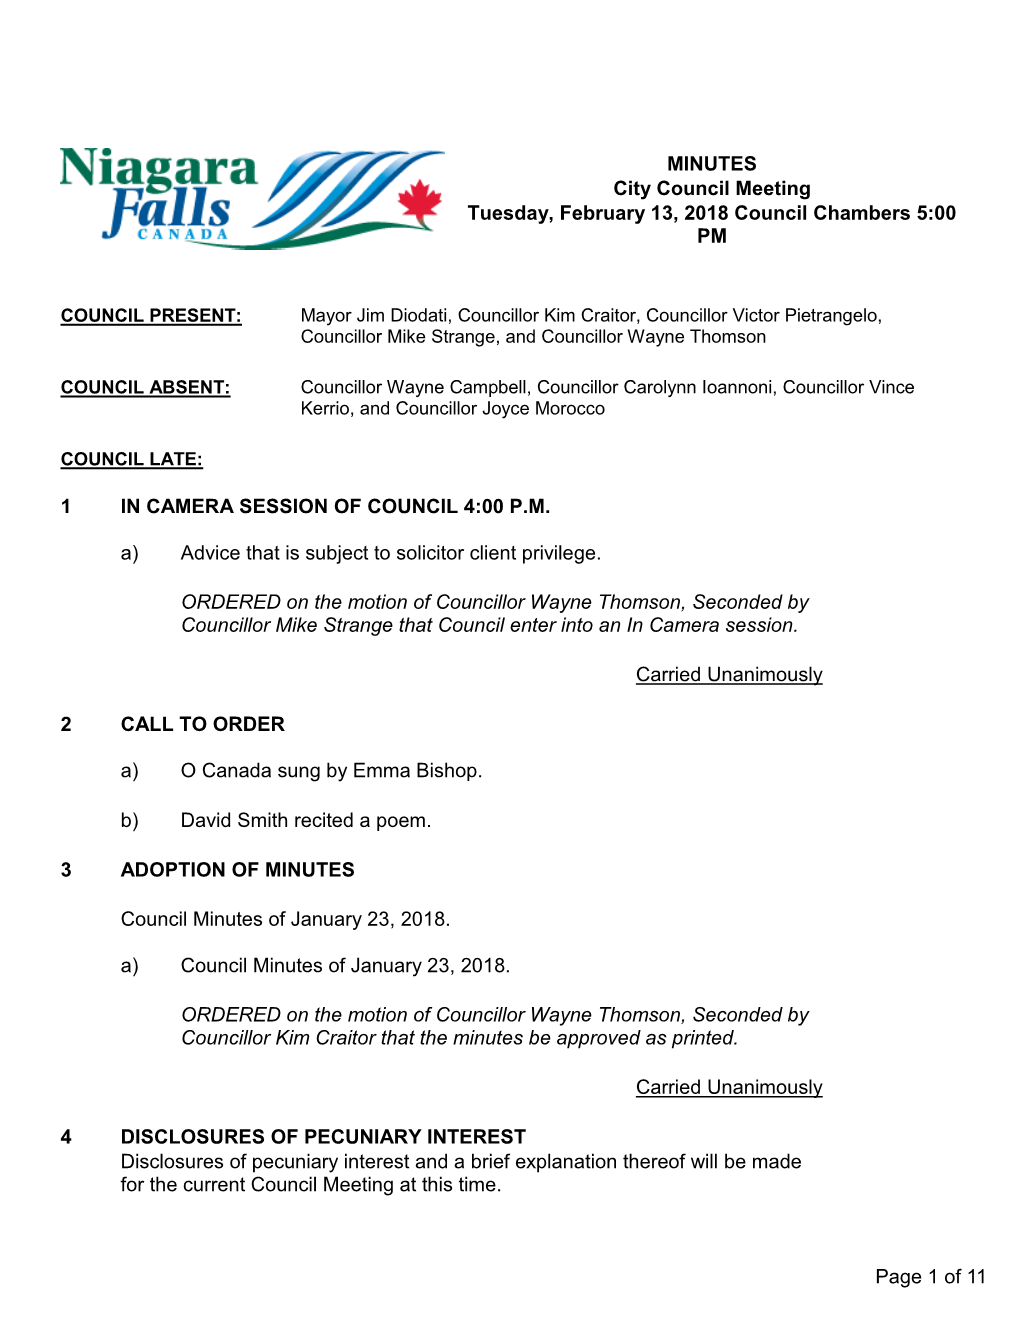 City Council Meeting Tuesday, February 13, 2018 Council Chambers 5:00 PM